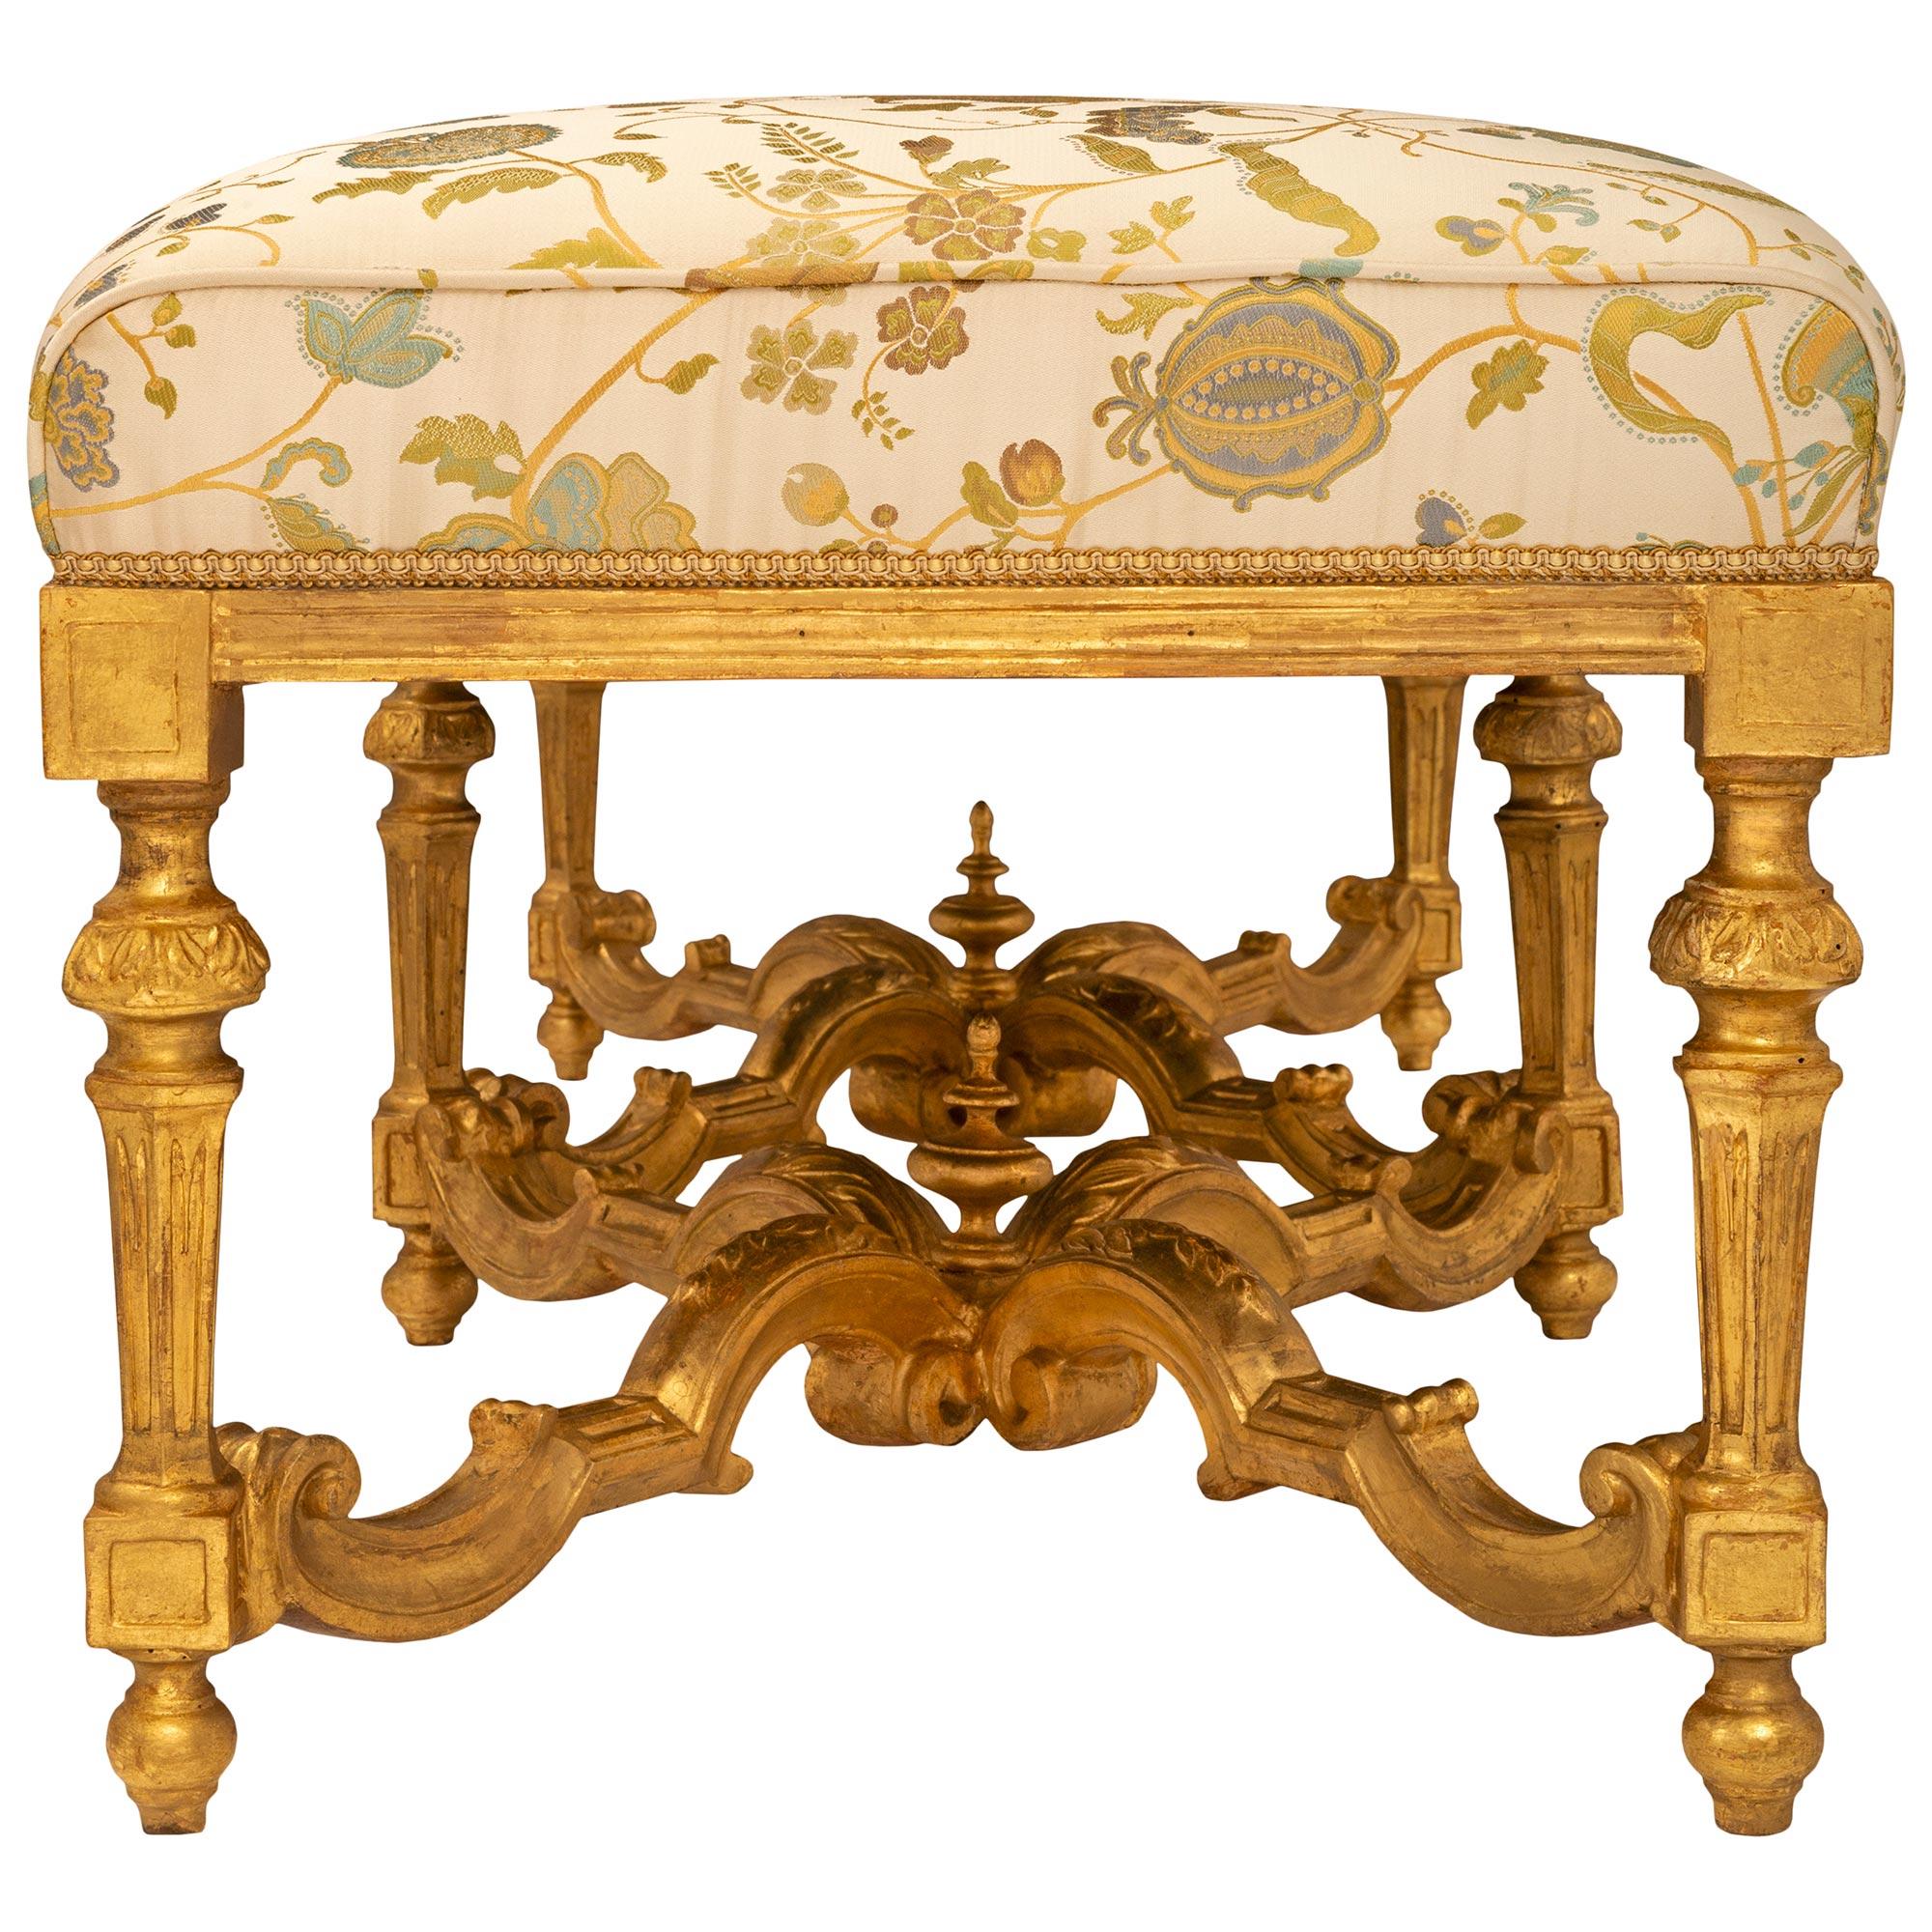 Italian Early 18th Century Louis XIV Period Giltwood Bench For Sale 1